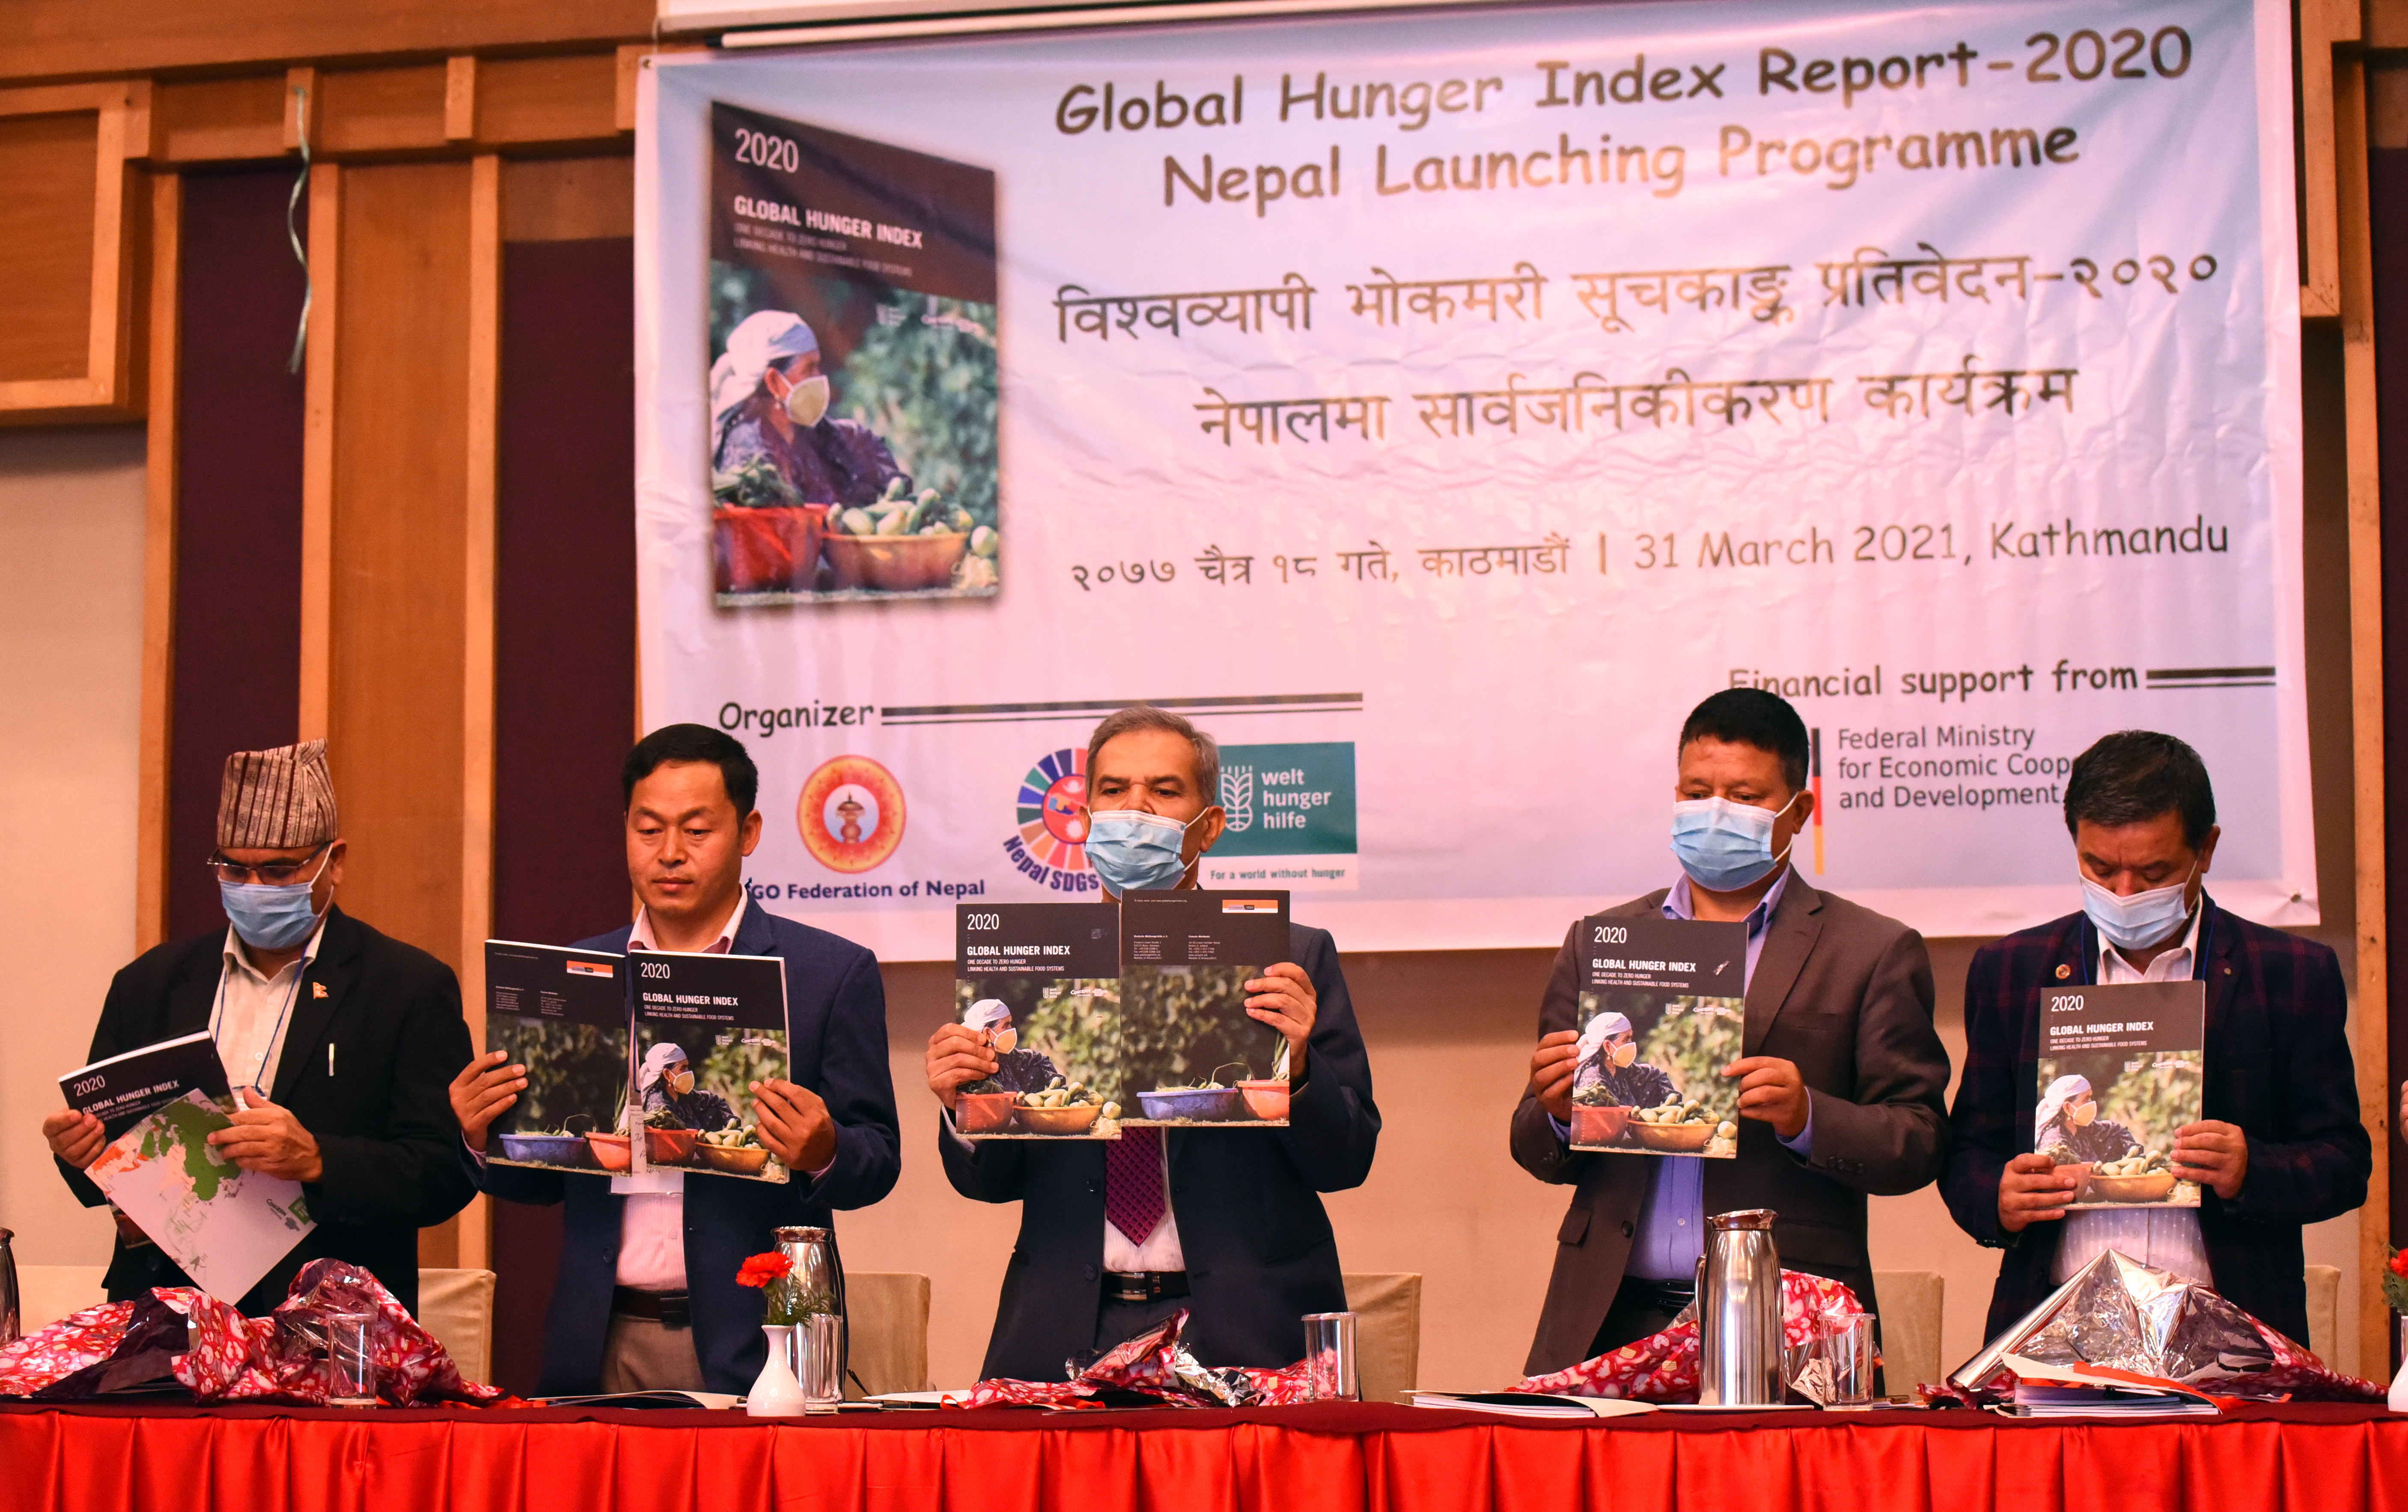 globe-not-on-track-to-achieve-zero-hunger-by-2030-2020-ghi-report